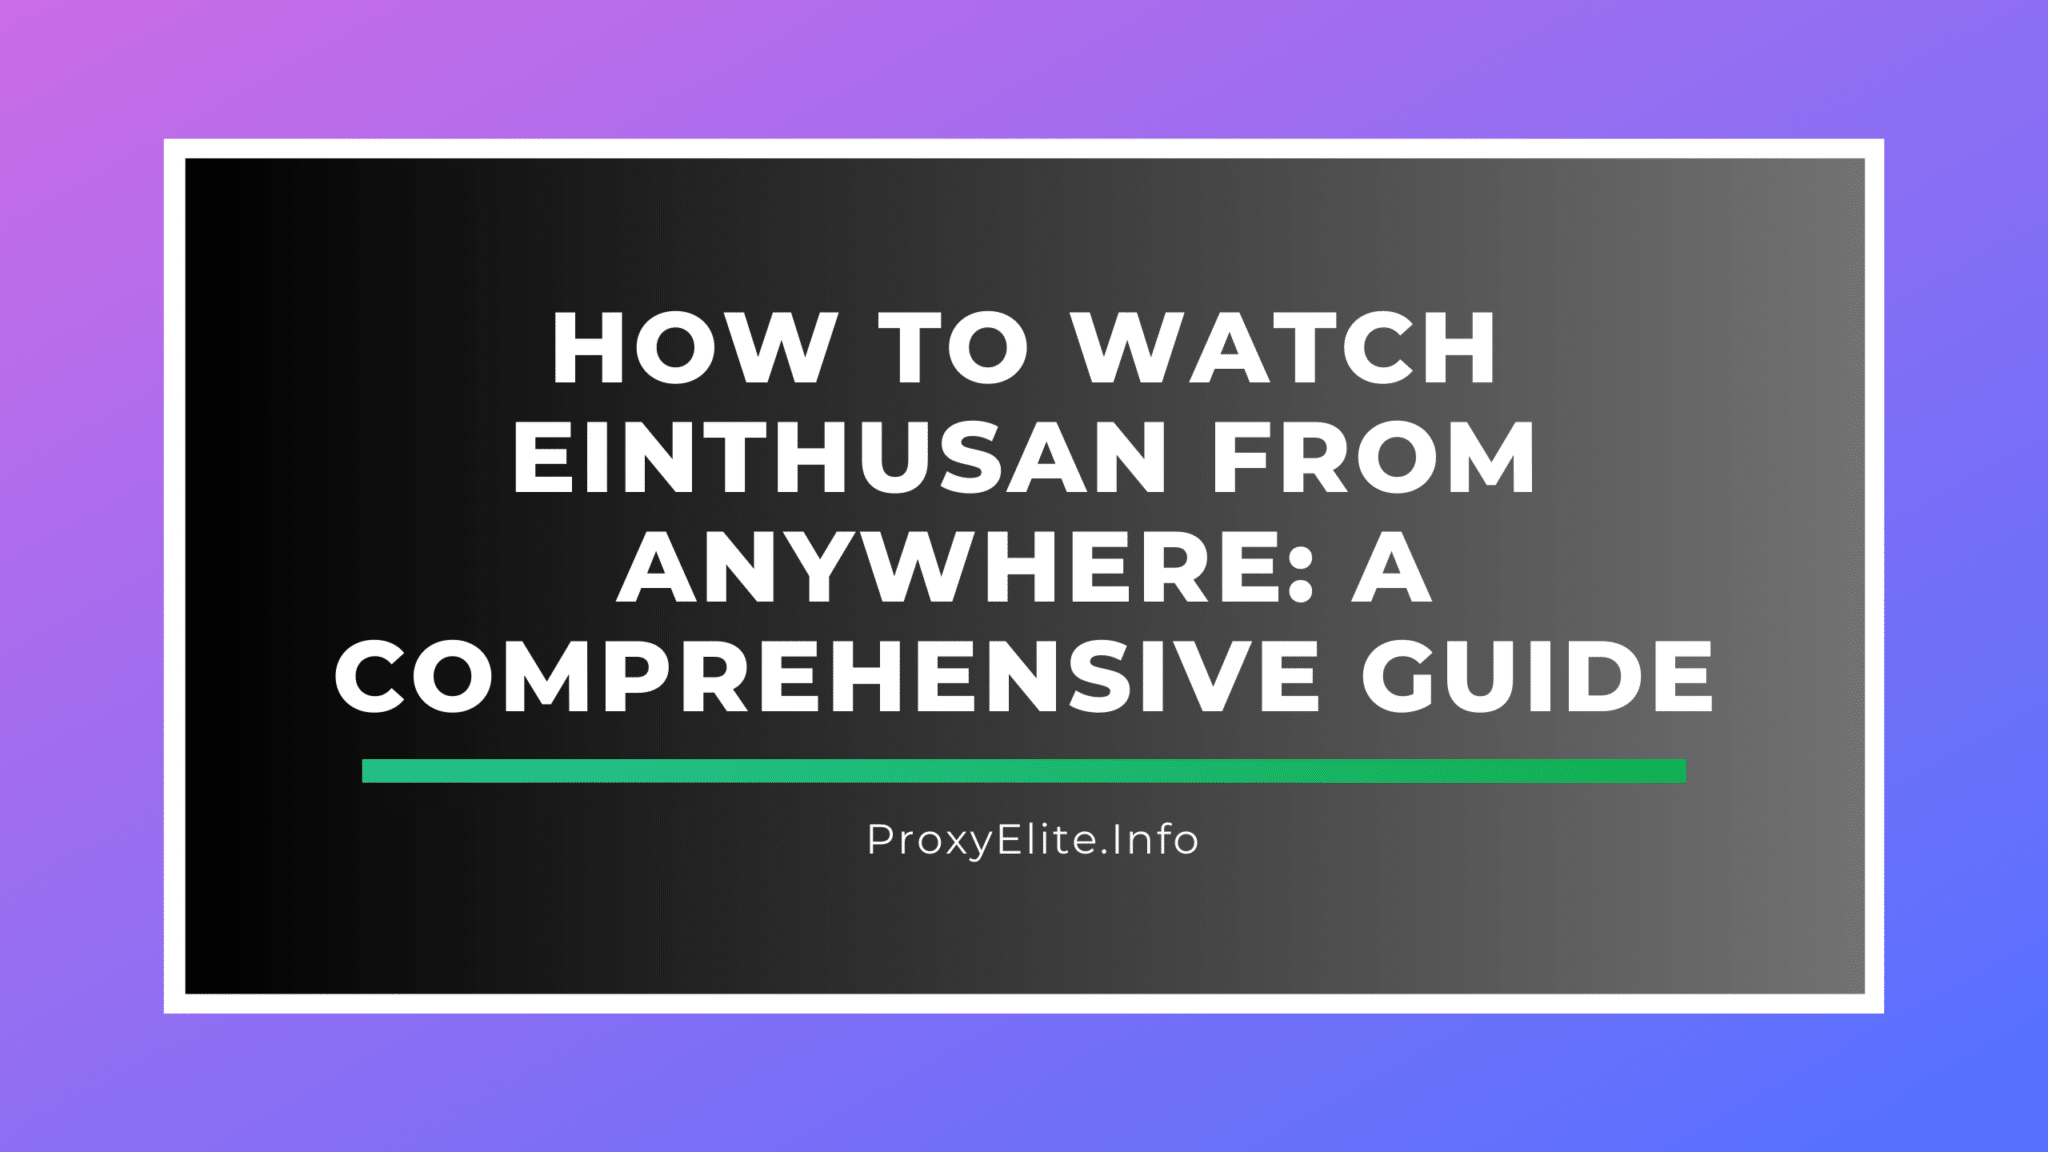 How to Watch Einthusan from Anywhere: A Comprehensive Guide